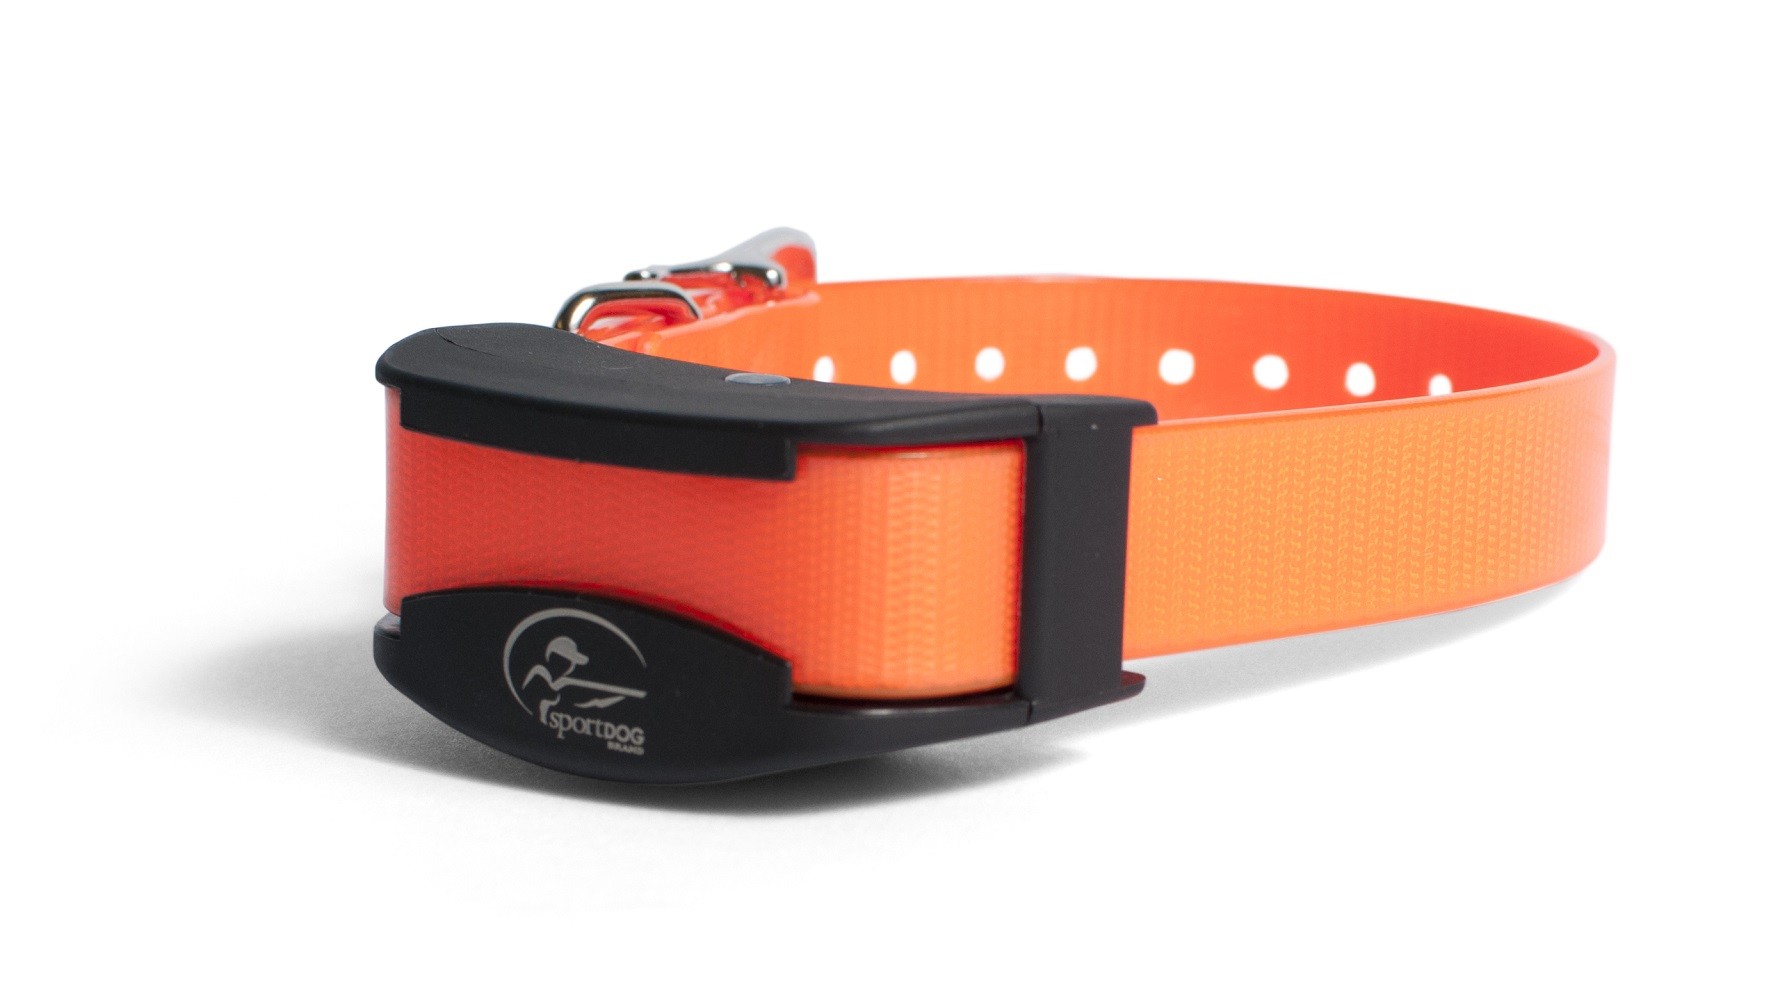 Collier suppl. de dressage SportDog / Petit chien SDR-AFE, MADE IN CHASSE - Equipements de chasse